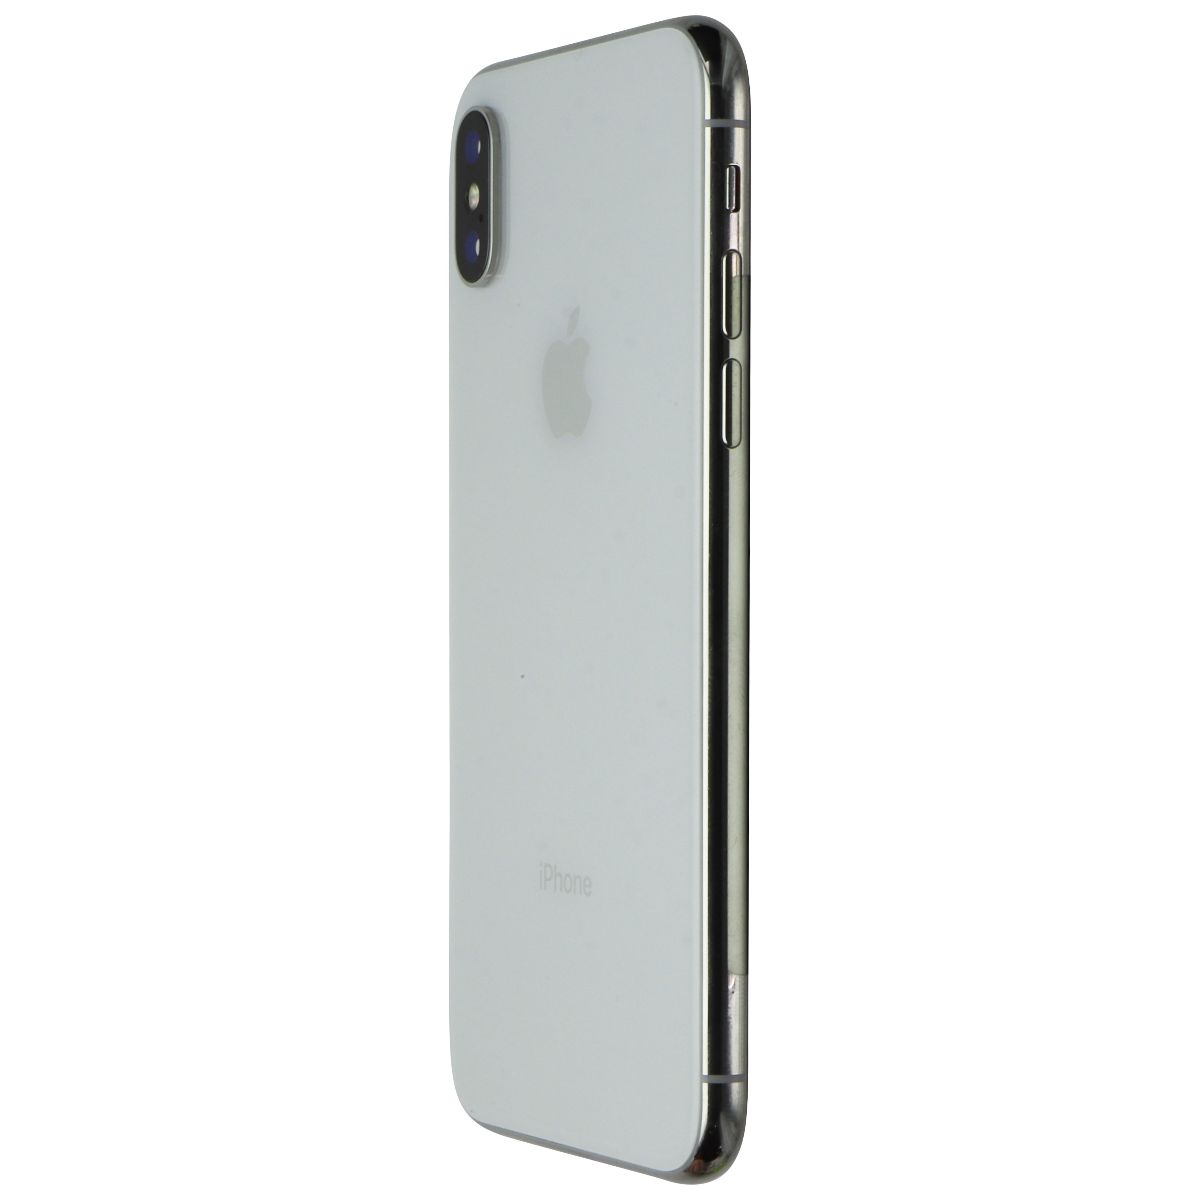 Apple iPhone X (5.8-inch) (A1901) Unlocked - 256GB / Silver - Bad Face ID* Cell Phones & Smartphones Apple    - Simple Cell Bulk Wholesale Pricing - USA Seller